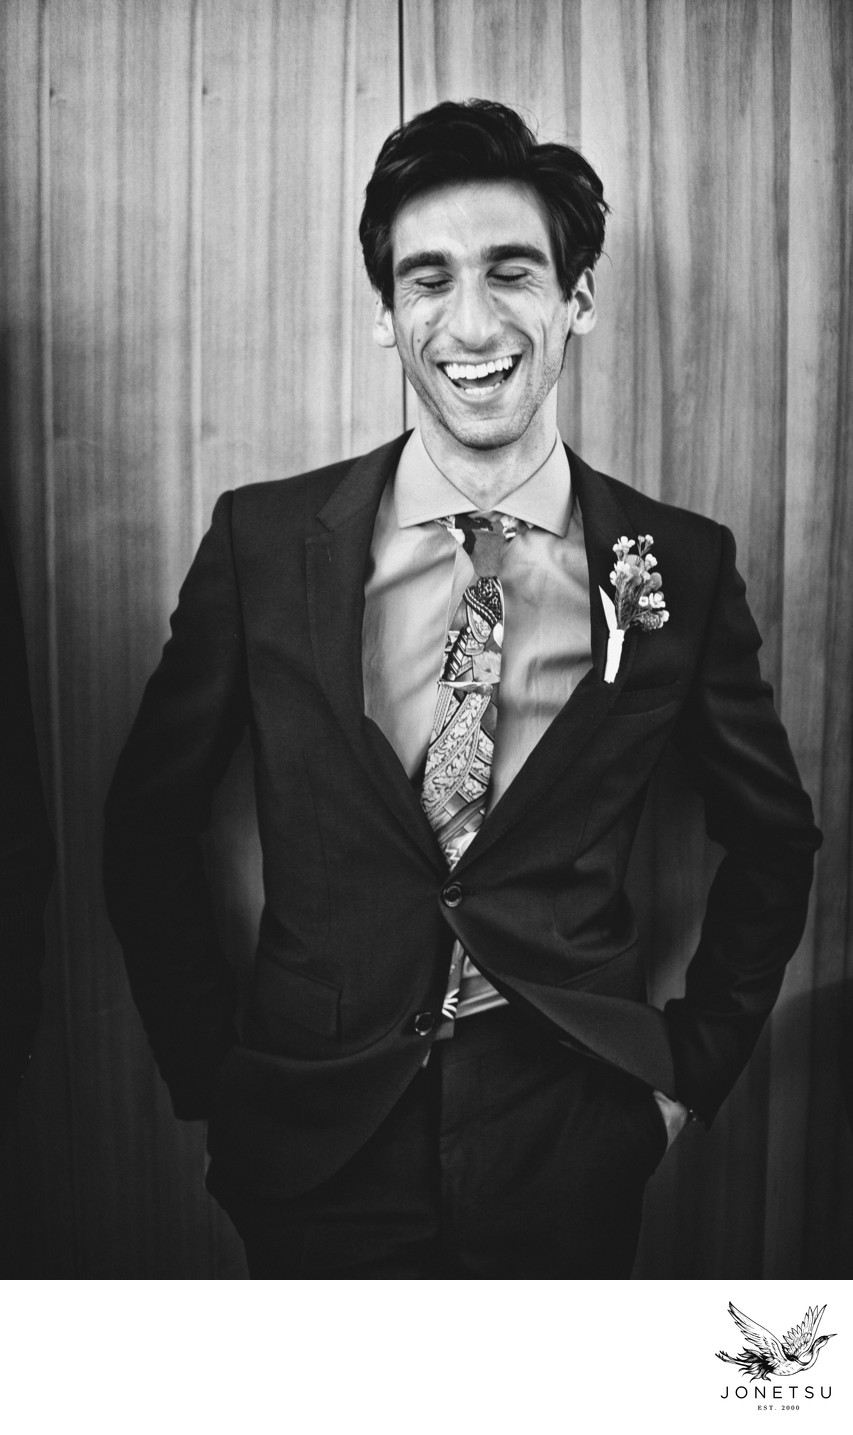 Laughing brother of the bride in black and white